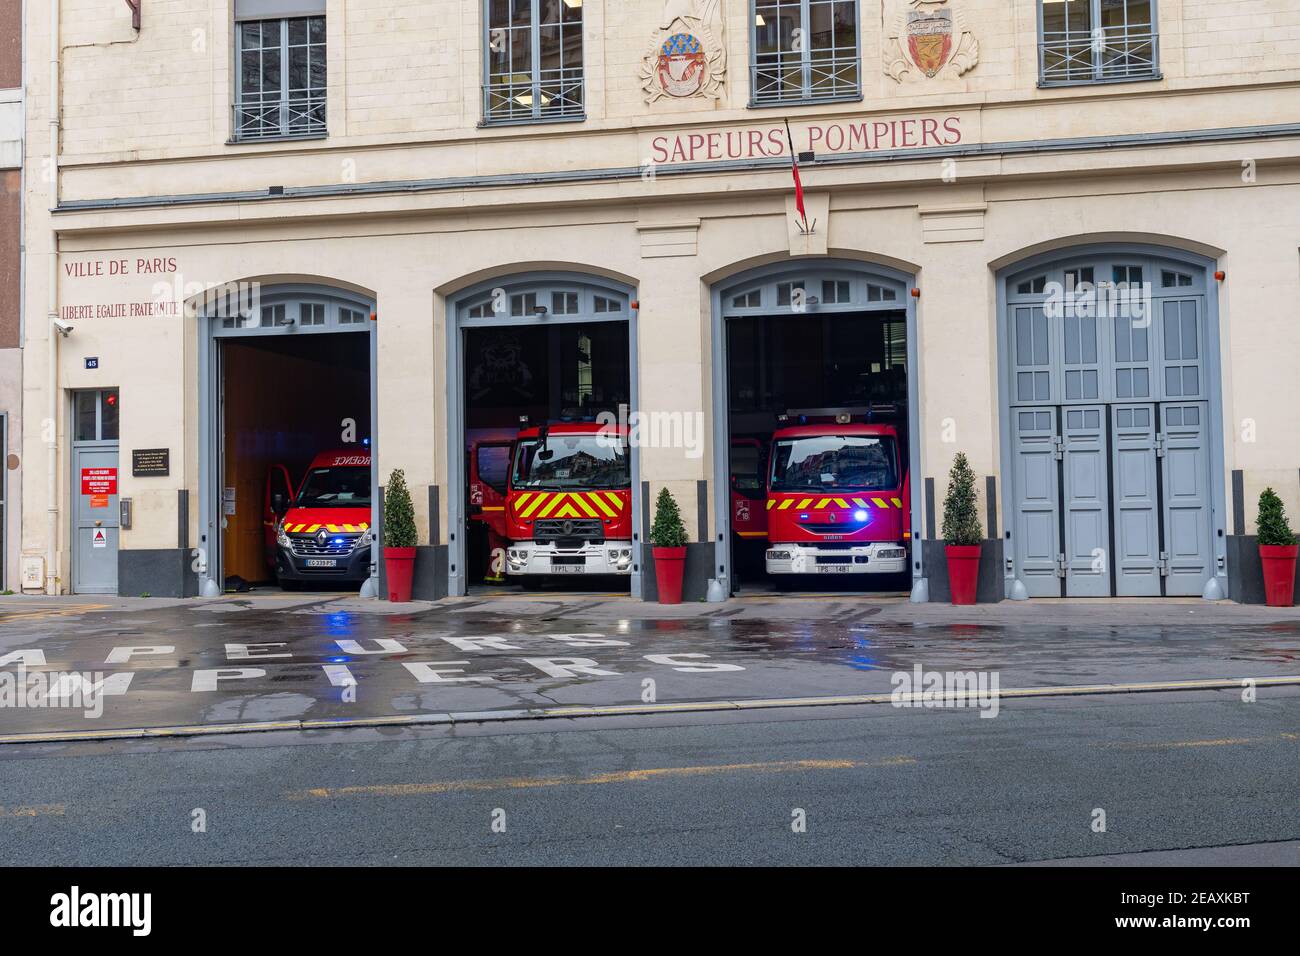 Red fire trucks of the Paris Fire Brigade - France Stock Photo